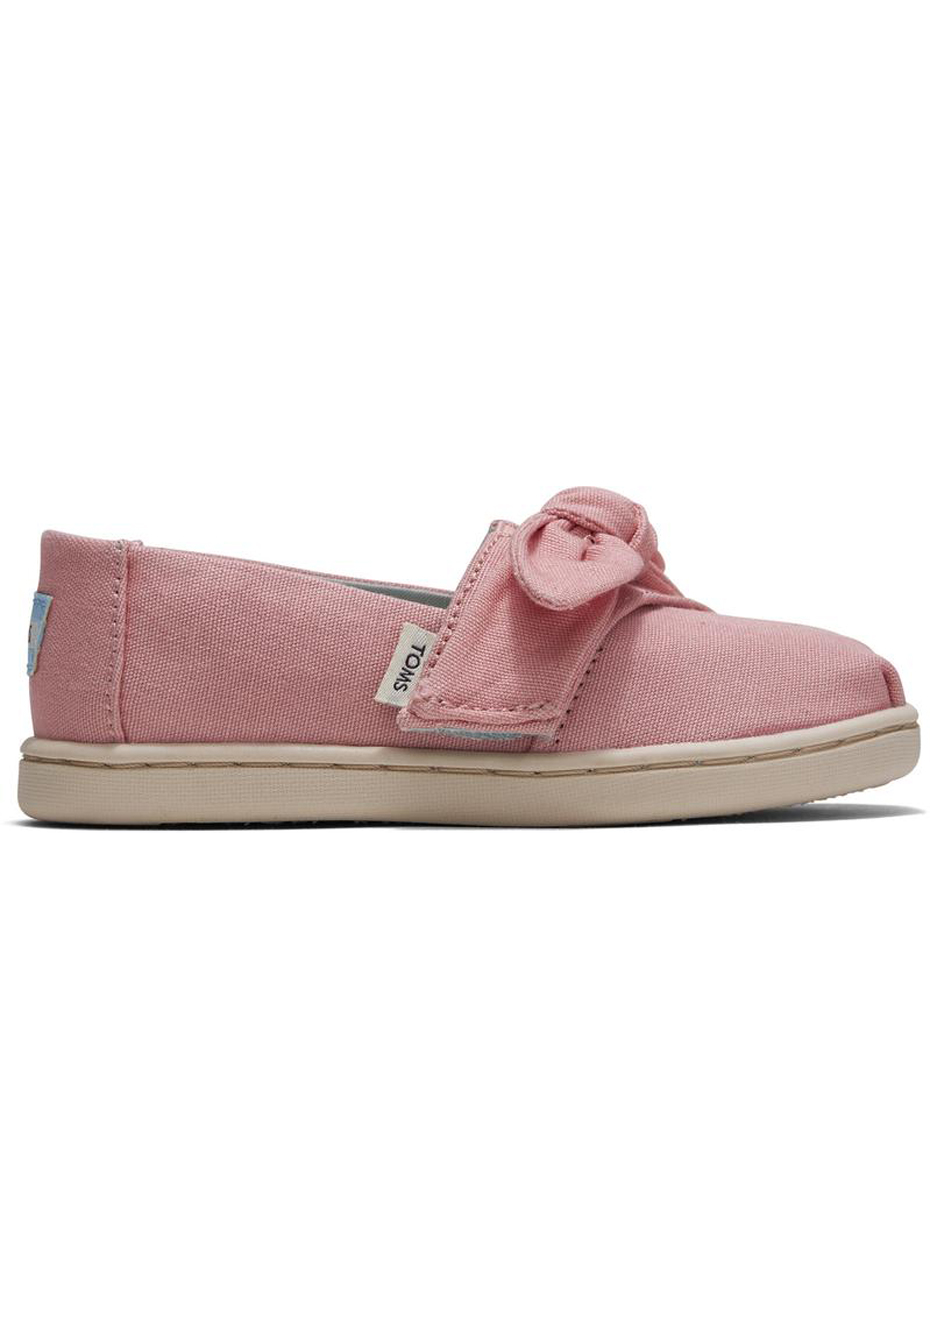 pink bow toms